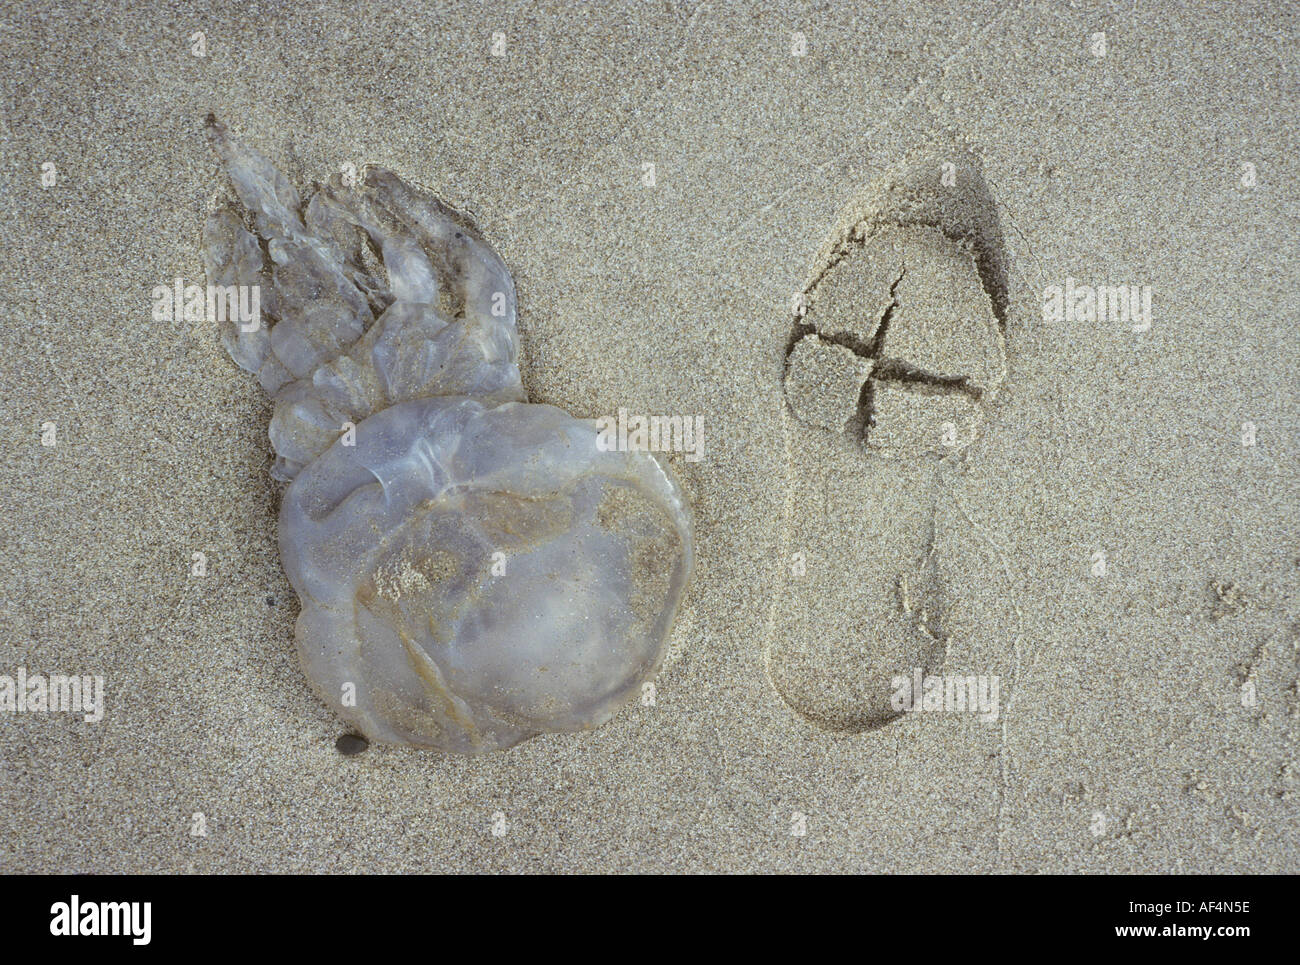 Dead jellyfish on beach with footprint in Donegal, Ireland Stock Photo